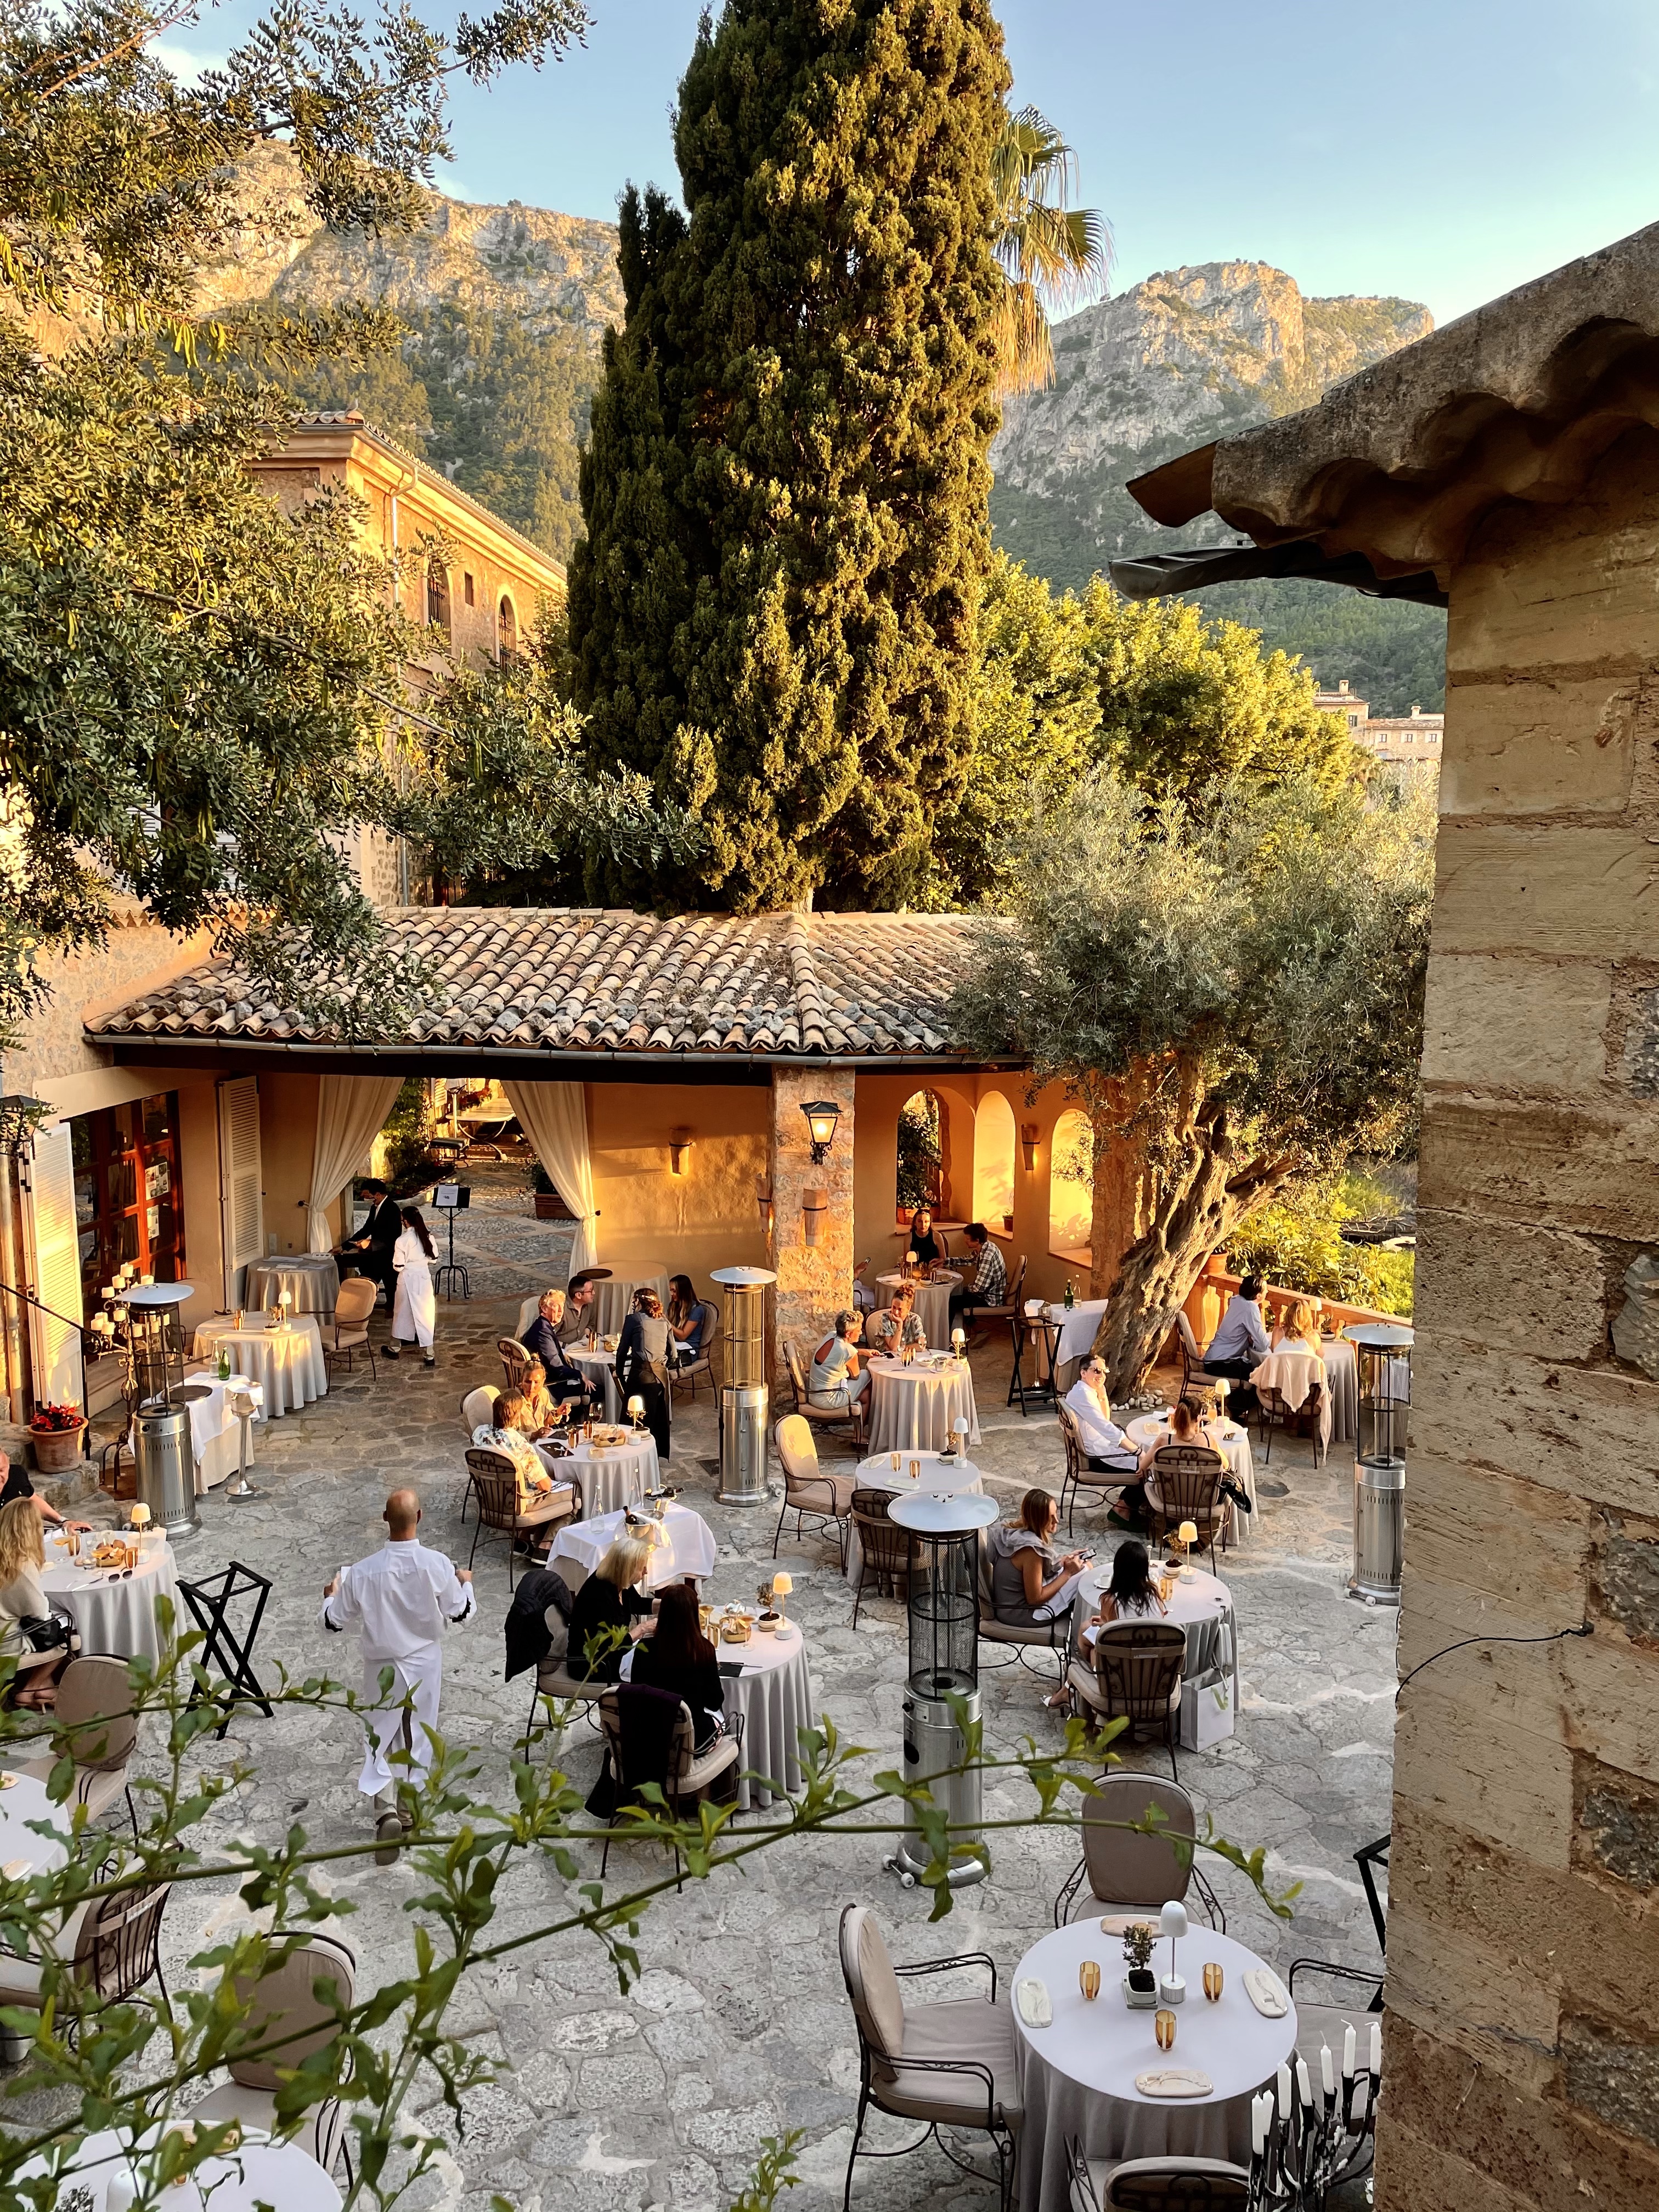 Belmond La Residencia - a luxury option for staying in Deia, Mallorca.  If you cannot or do not want to stay here, make sure you at least go for a drink or dinner here, I promise it will be your highlight!